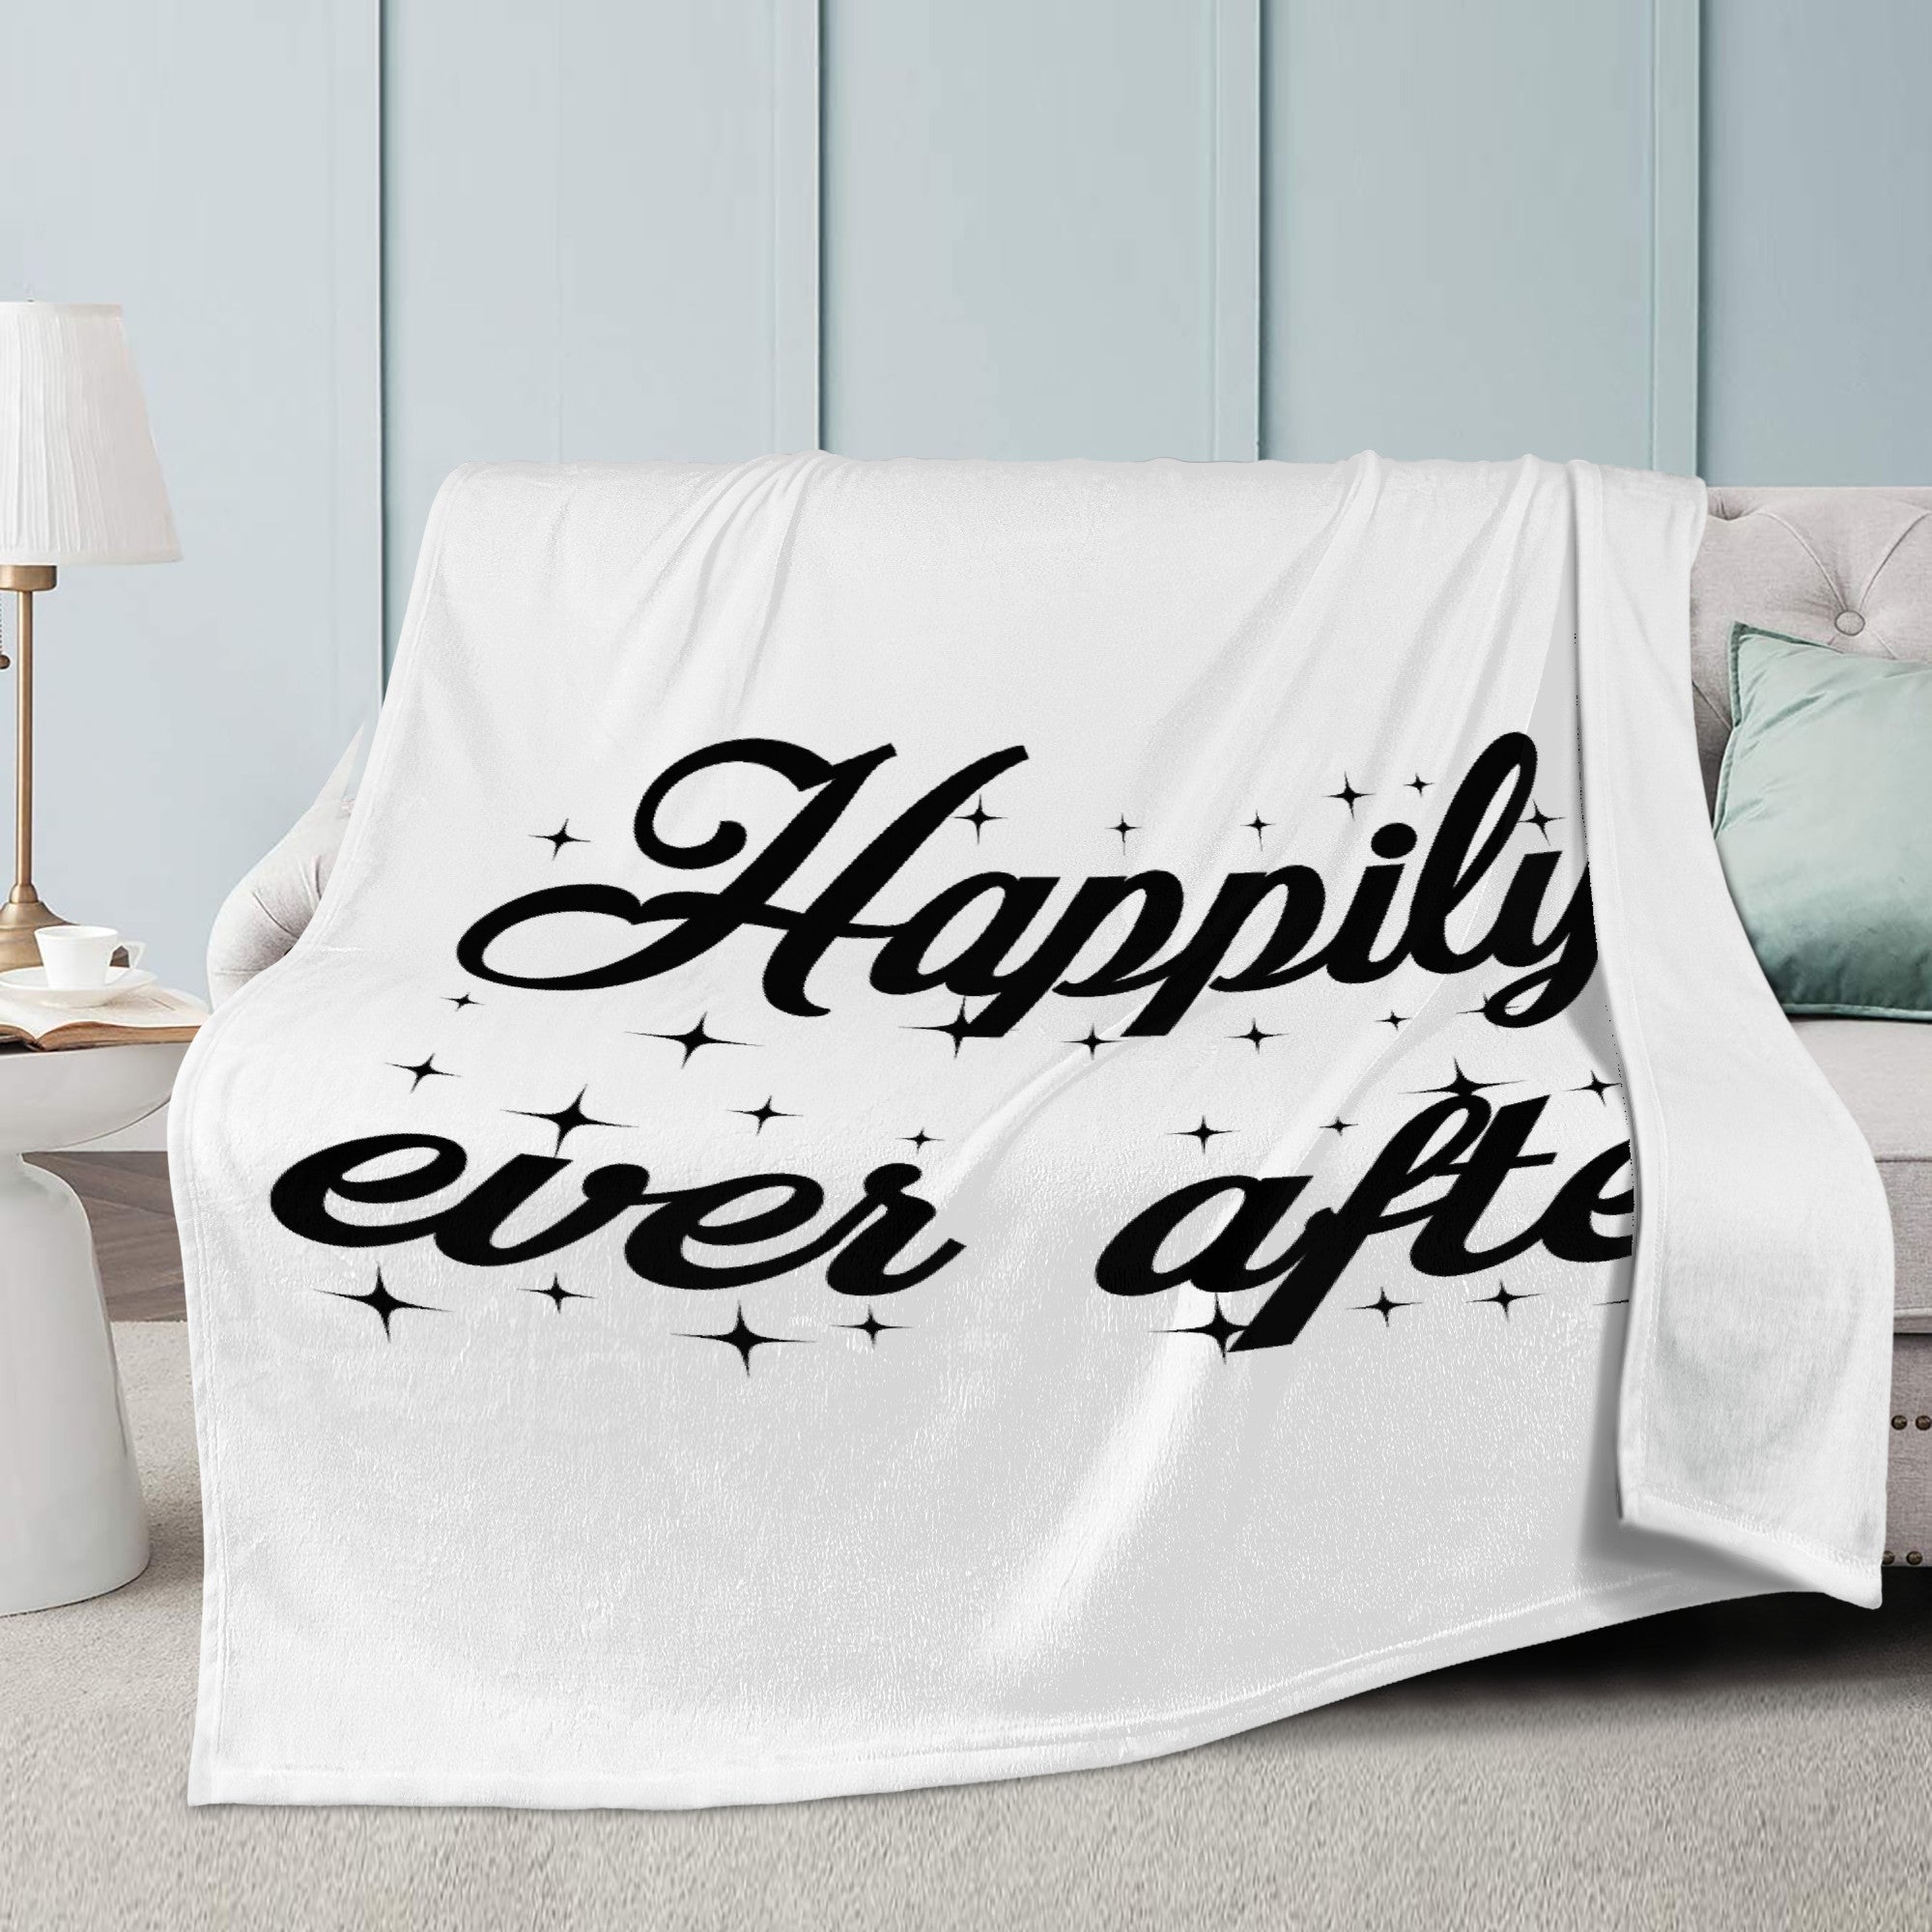 Blanket Happily ever after Home-clothes-jewelry